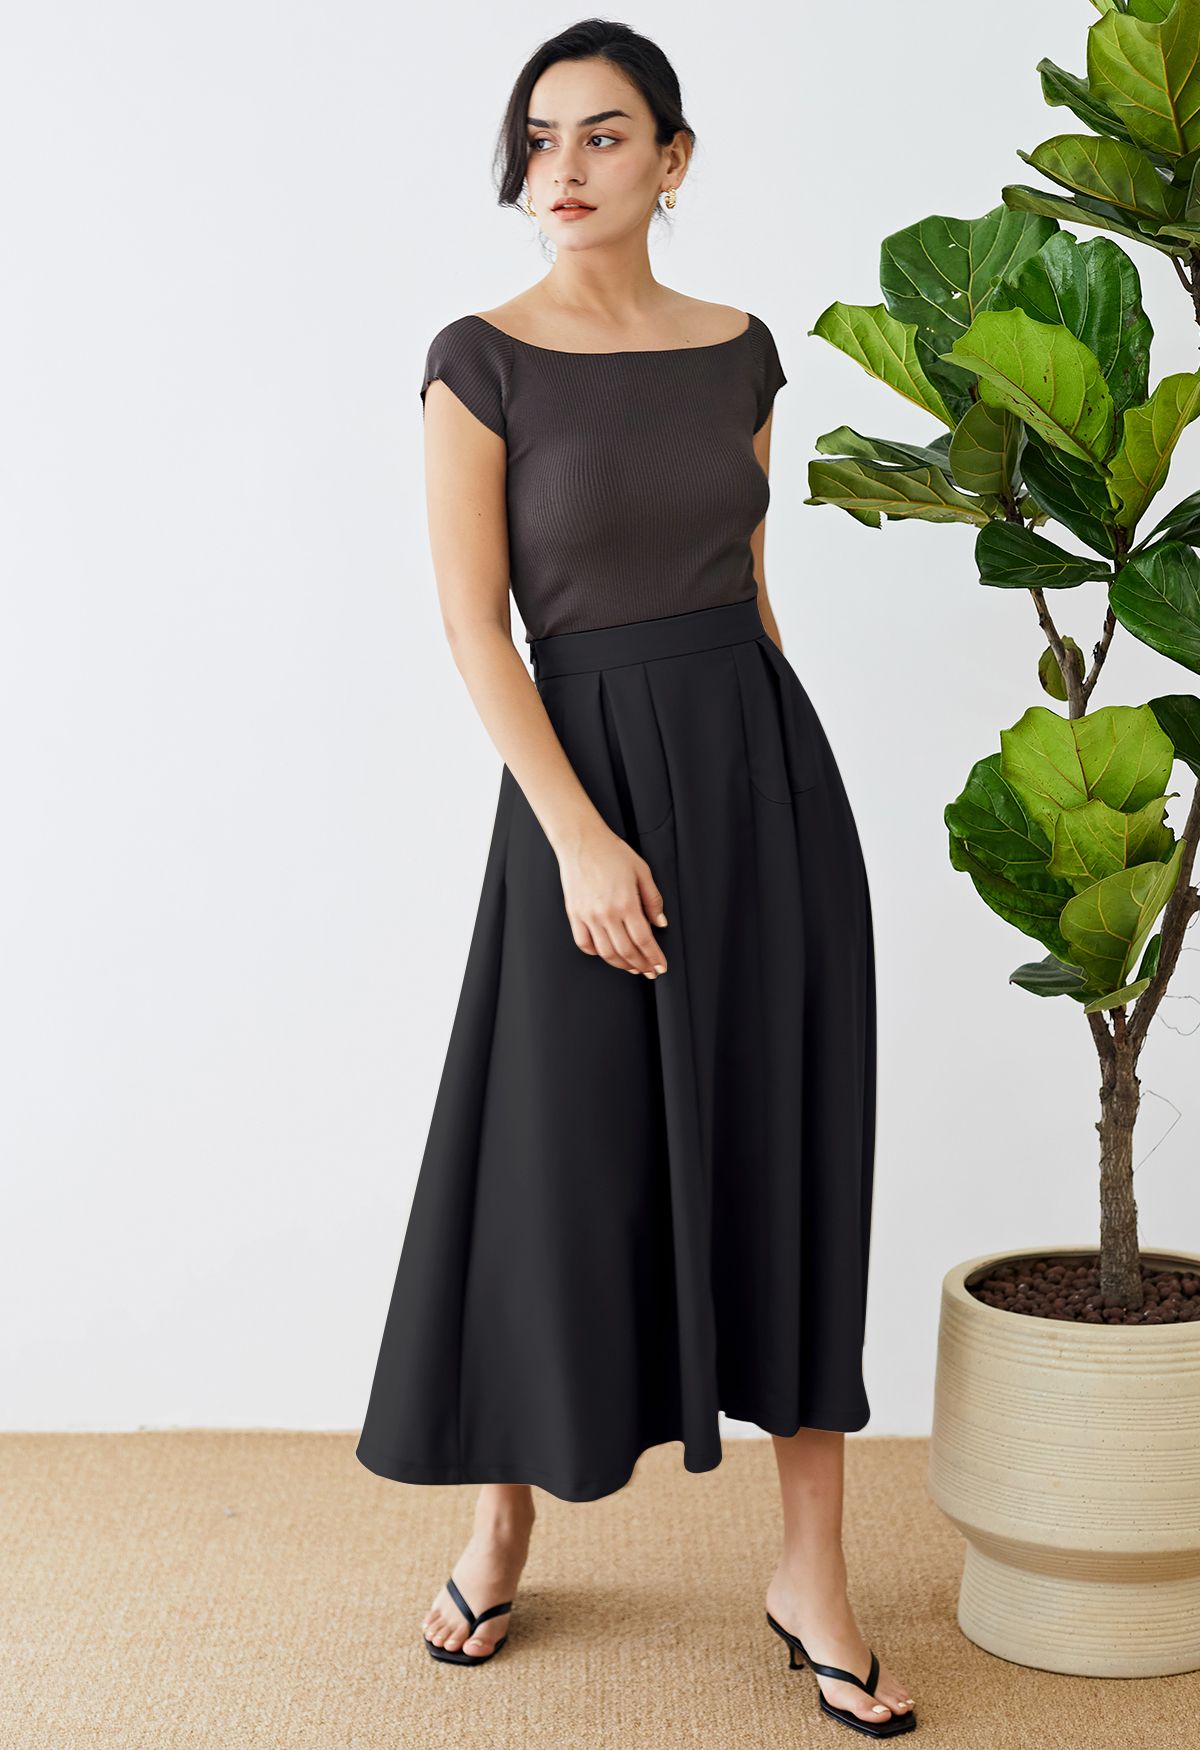 Seam Detailing Pleated A-Line Skirt in Black